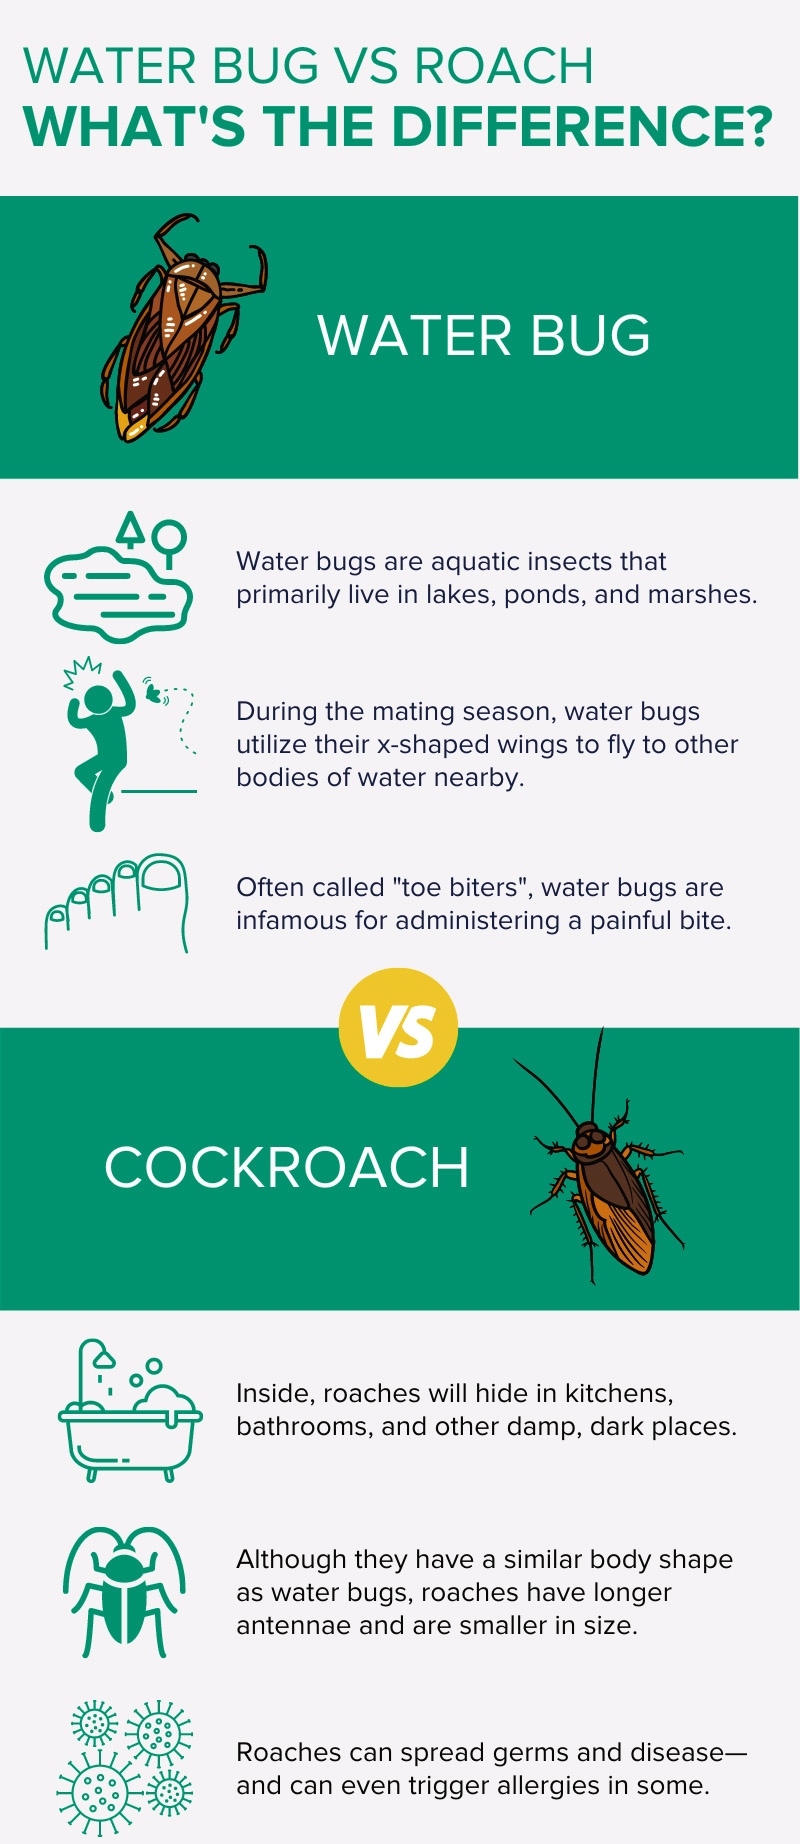 Water bug vs roach infographic